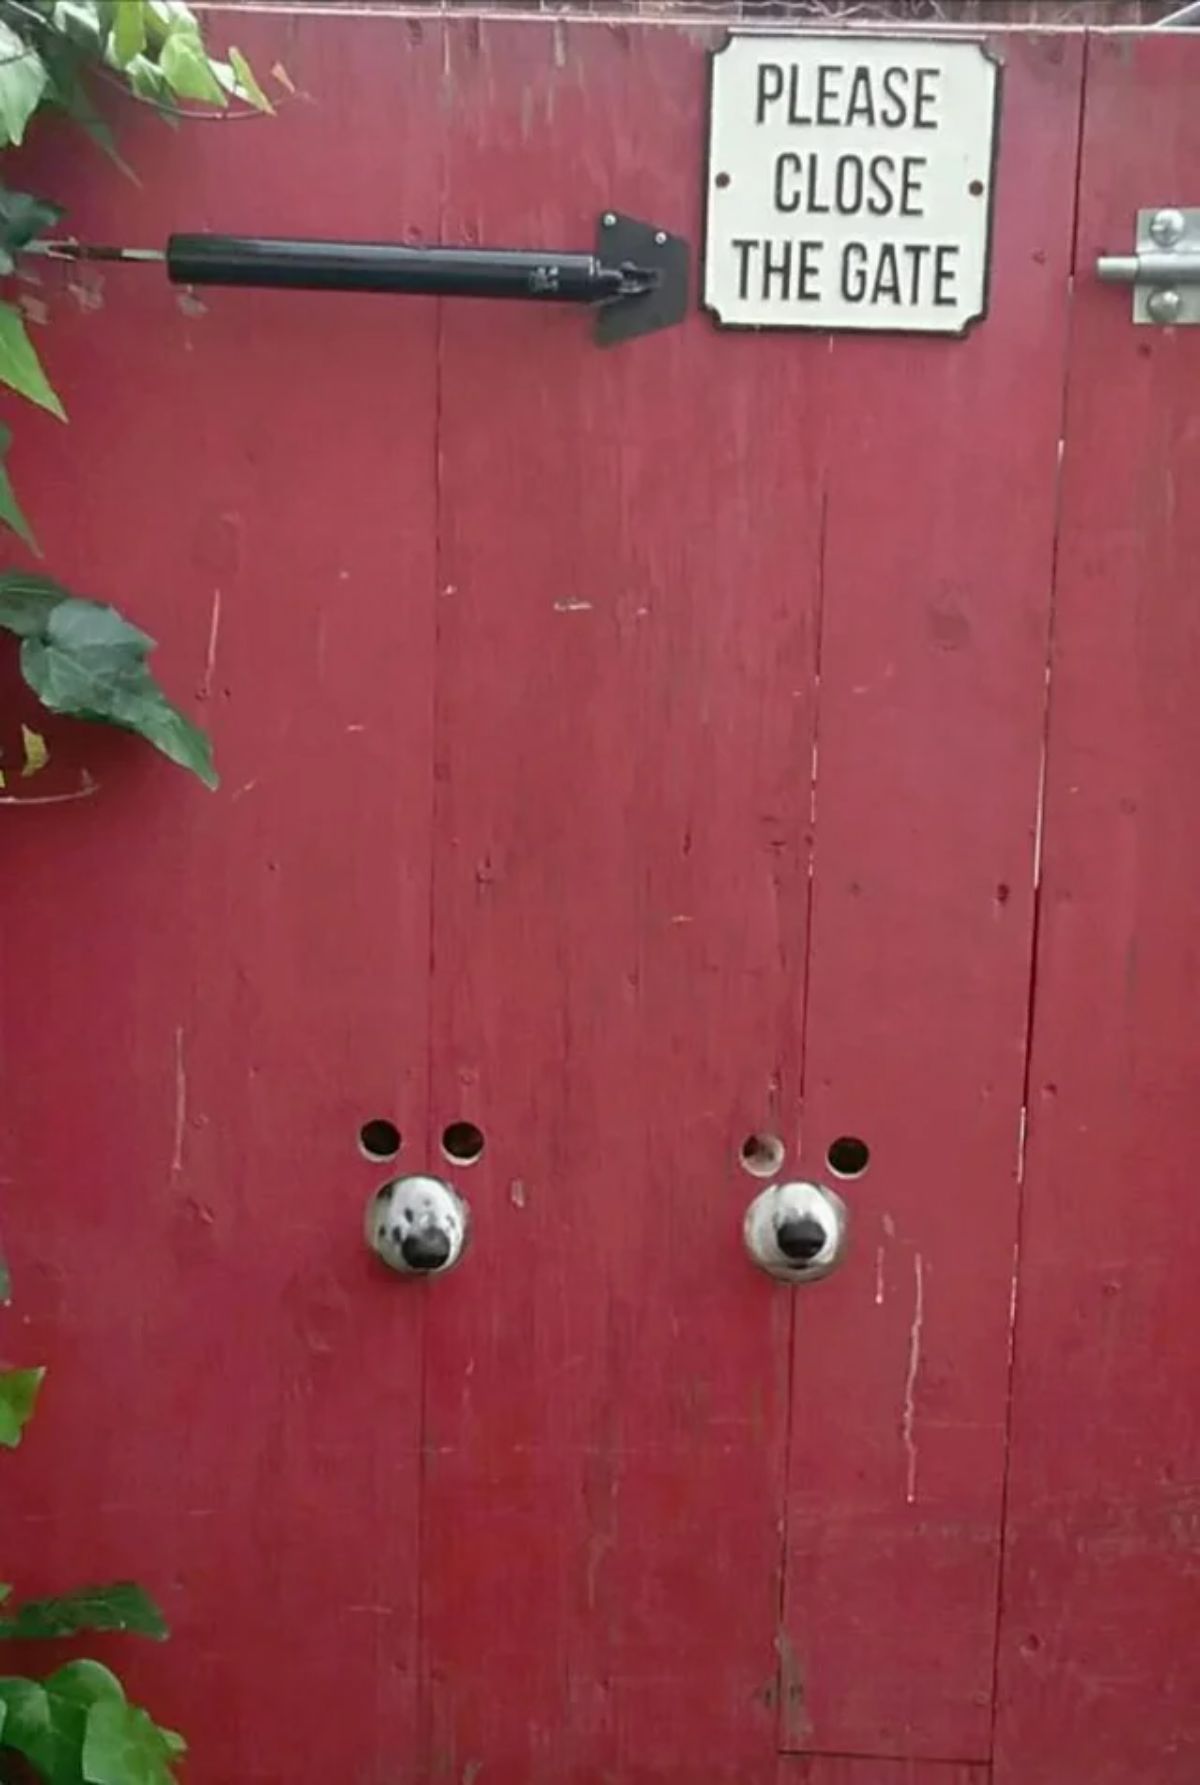 red gate with 2 sets of eye holes and nose holes with 2 dogs with white snouts sticking their noses through the nose holes and watching through the eye holes